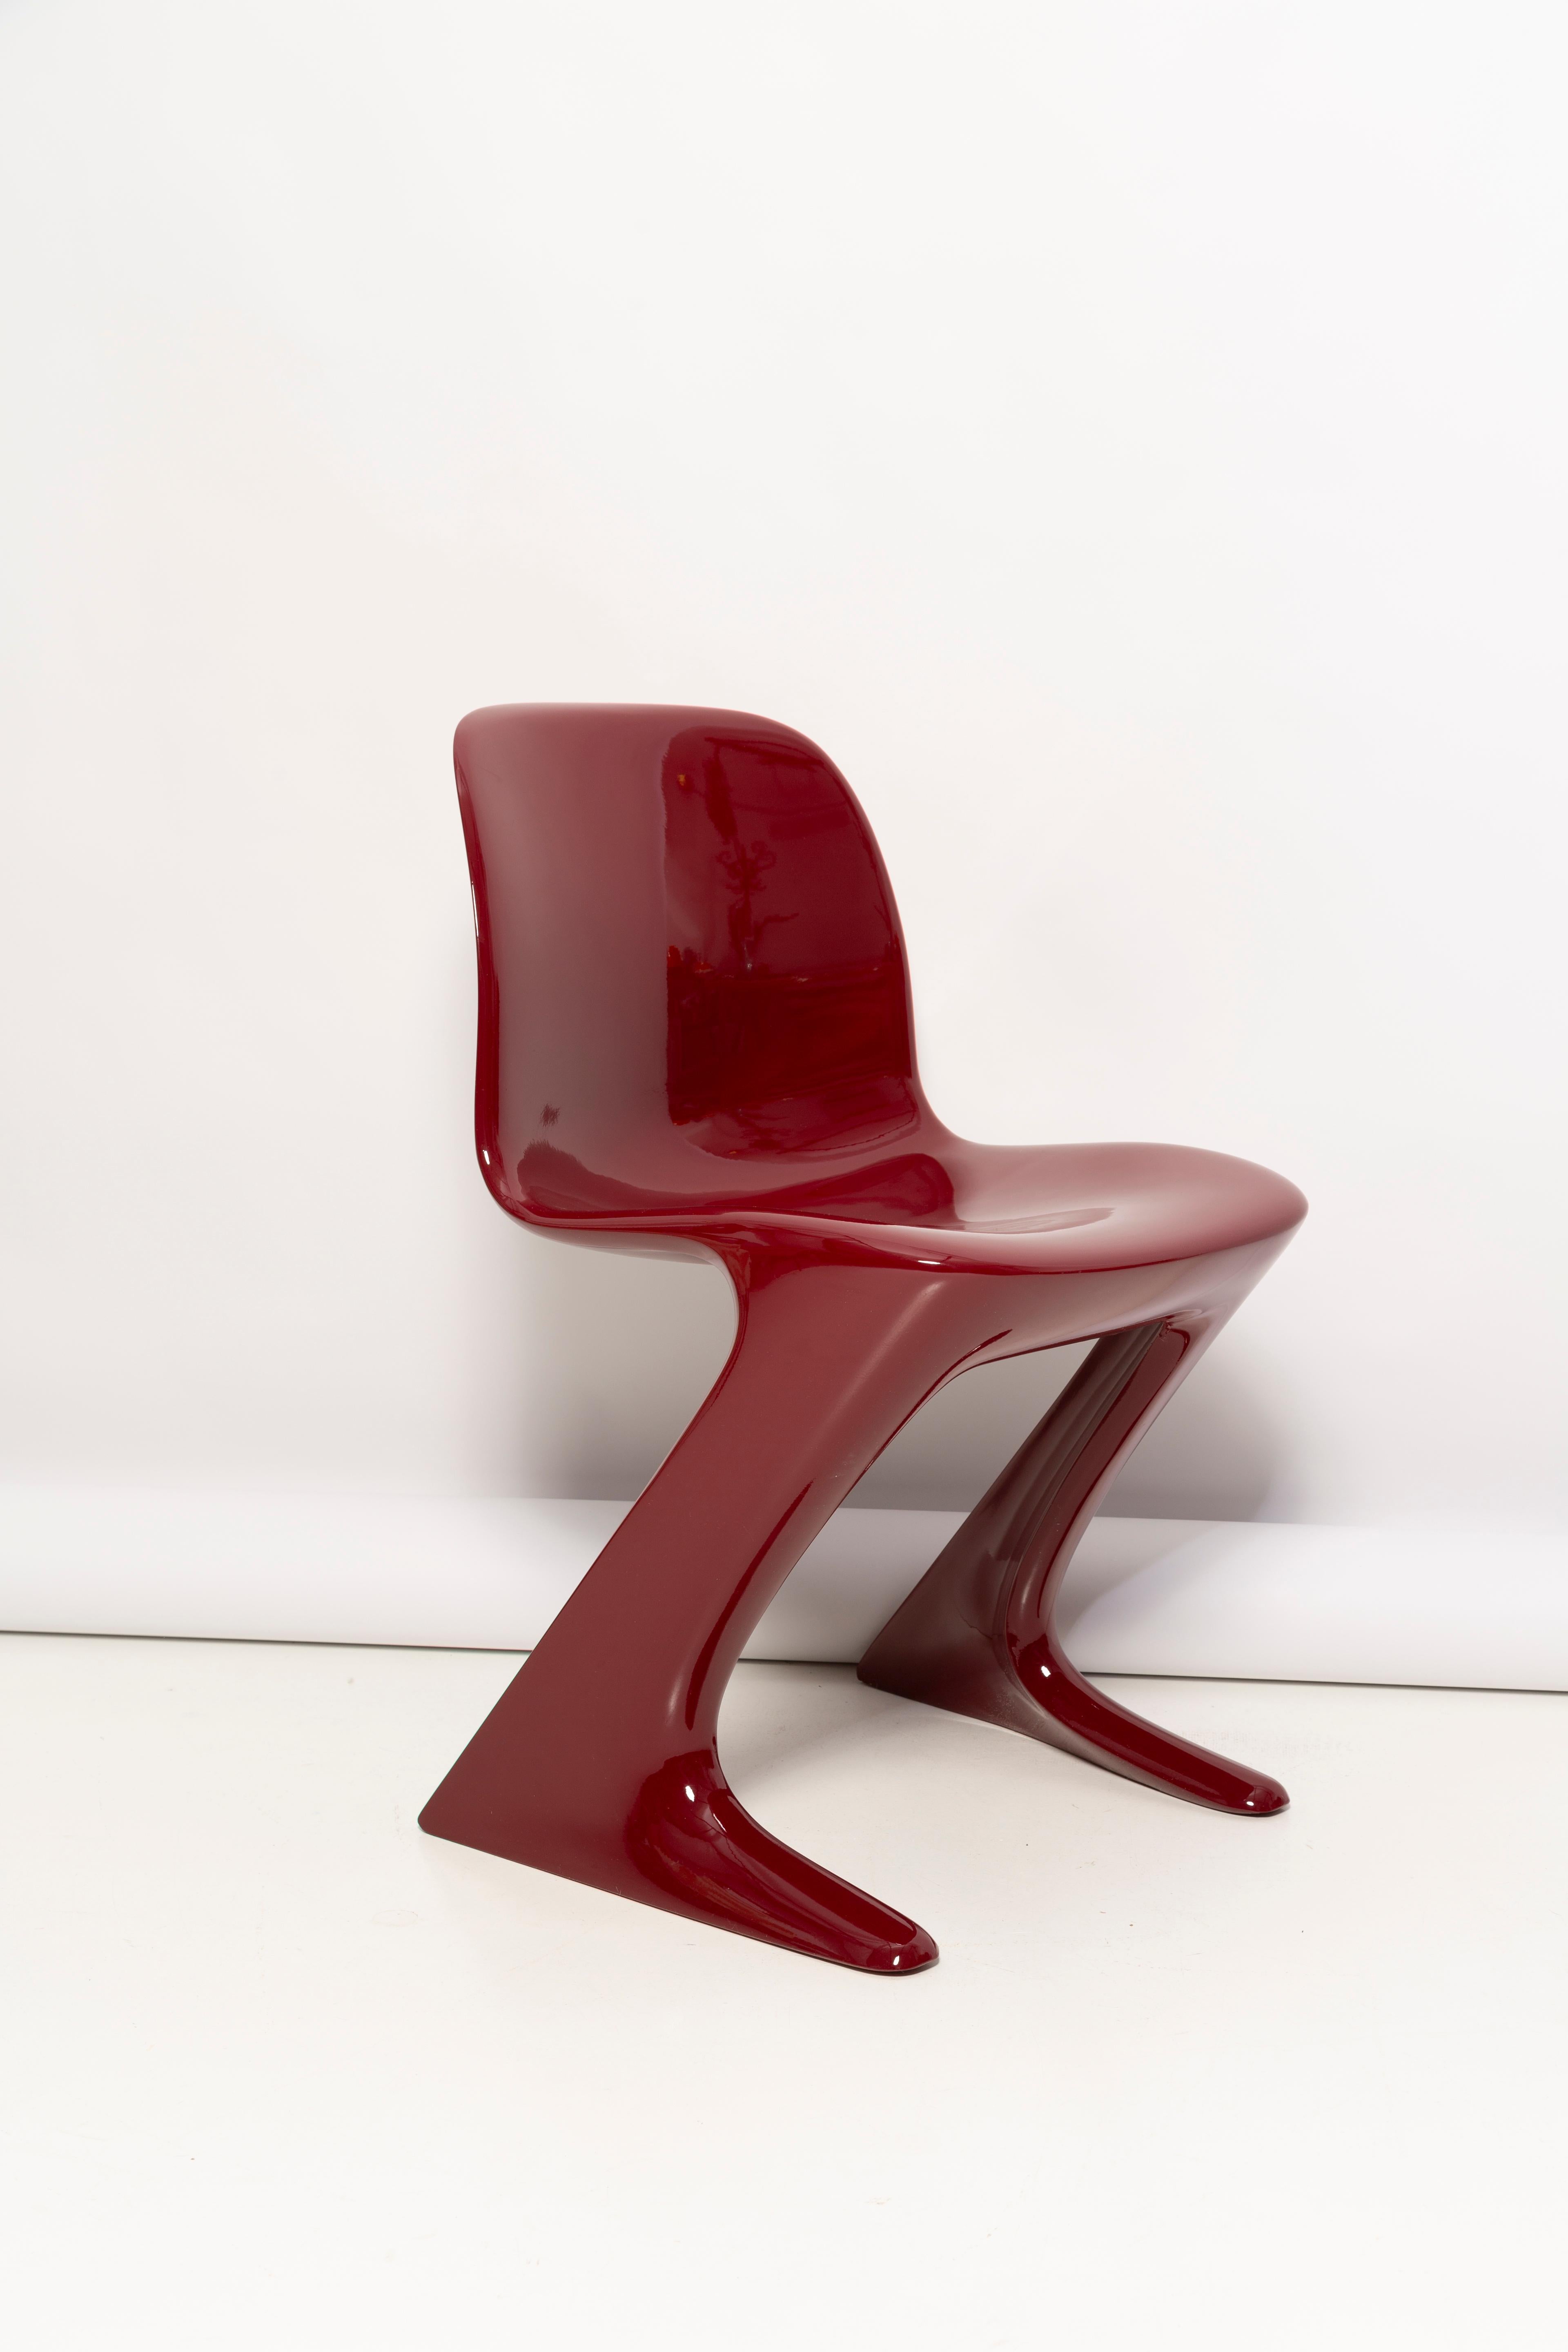 Lacquered Set of Six Dark Red Wine Kangaroo Chairs Designed by Ernst Moeckl, Germany, 1968 For Sale